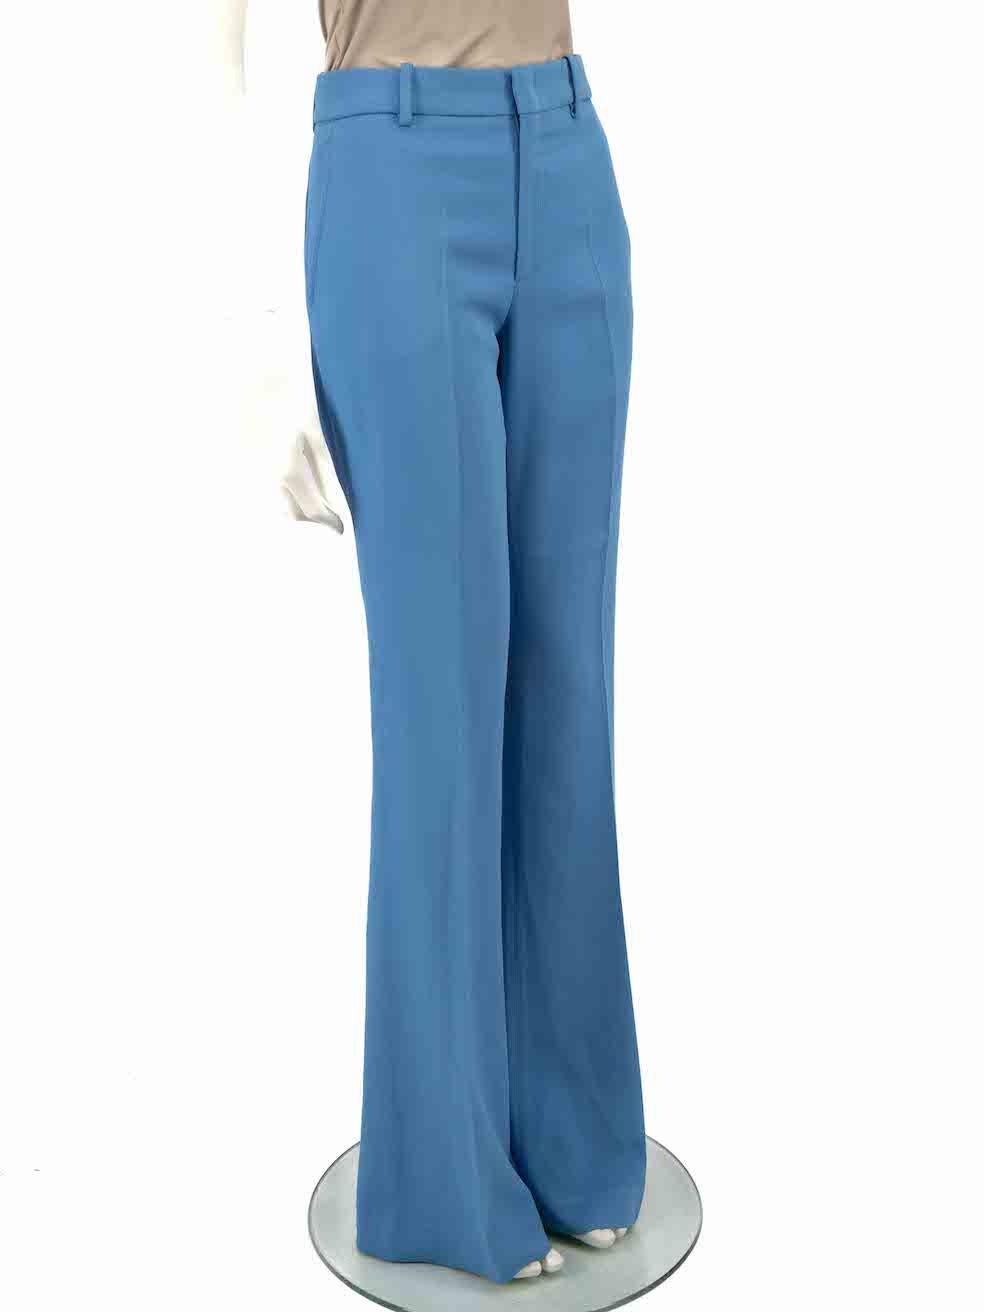 CONDITION is Very good. Minimal wear to trousers is evident. Minimal wear to the composition with negligible signs of past alteration at the centre back on this used Gucci designer resale item.
 
 
 
 Details
 
 
 Blue
 
 Synthetic
 
 Tailored